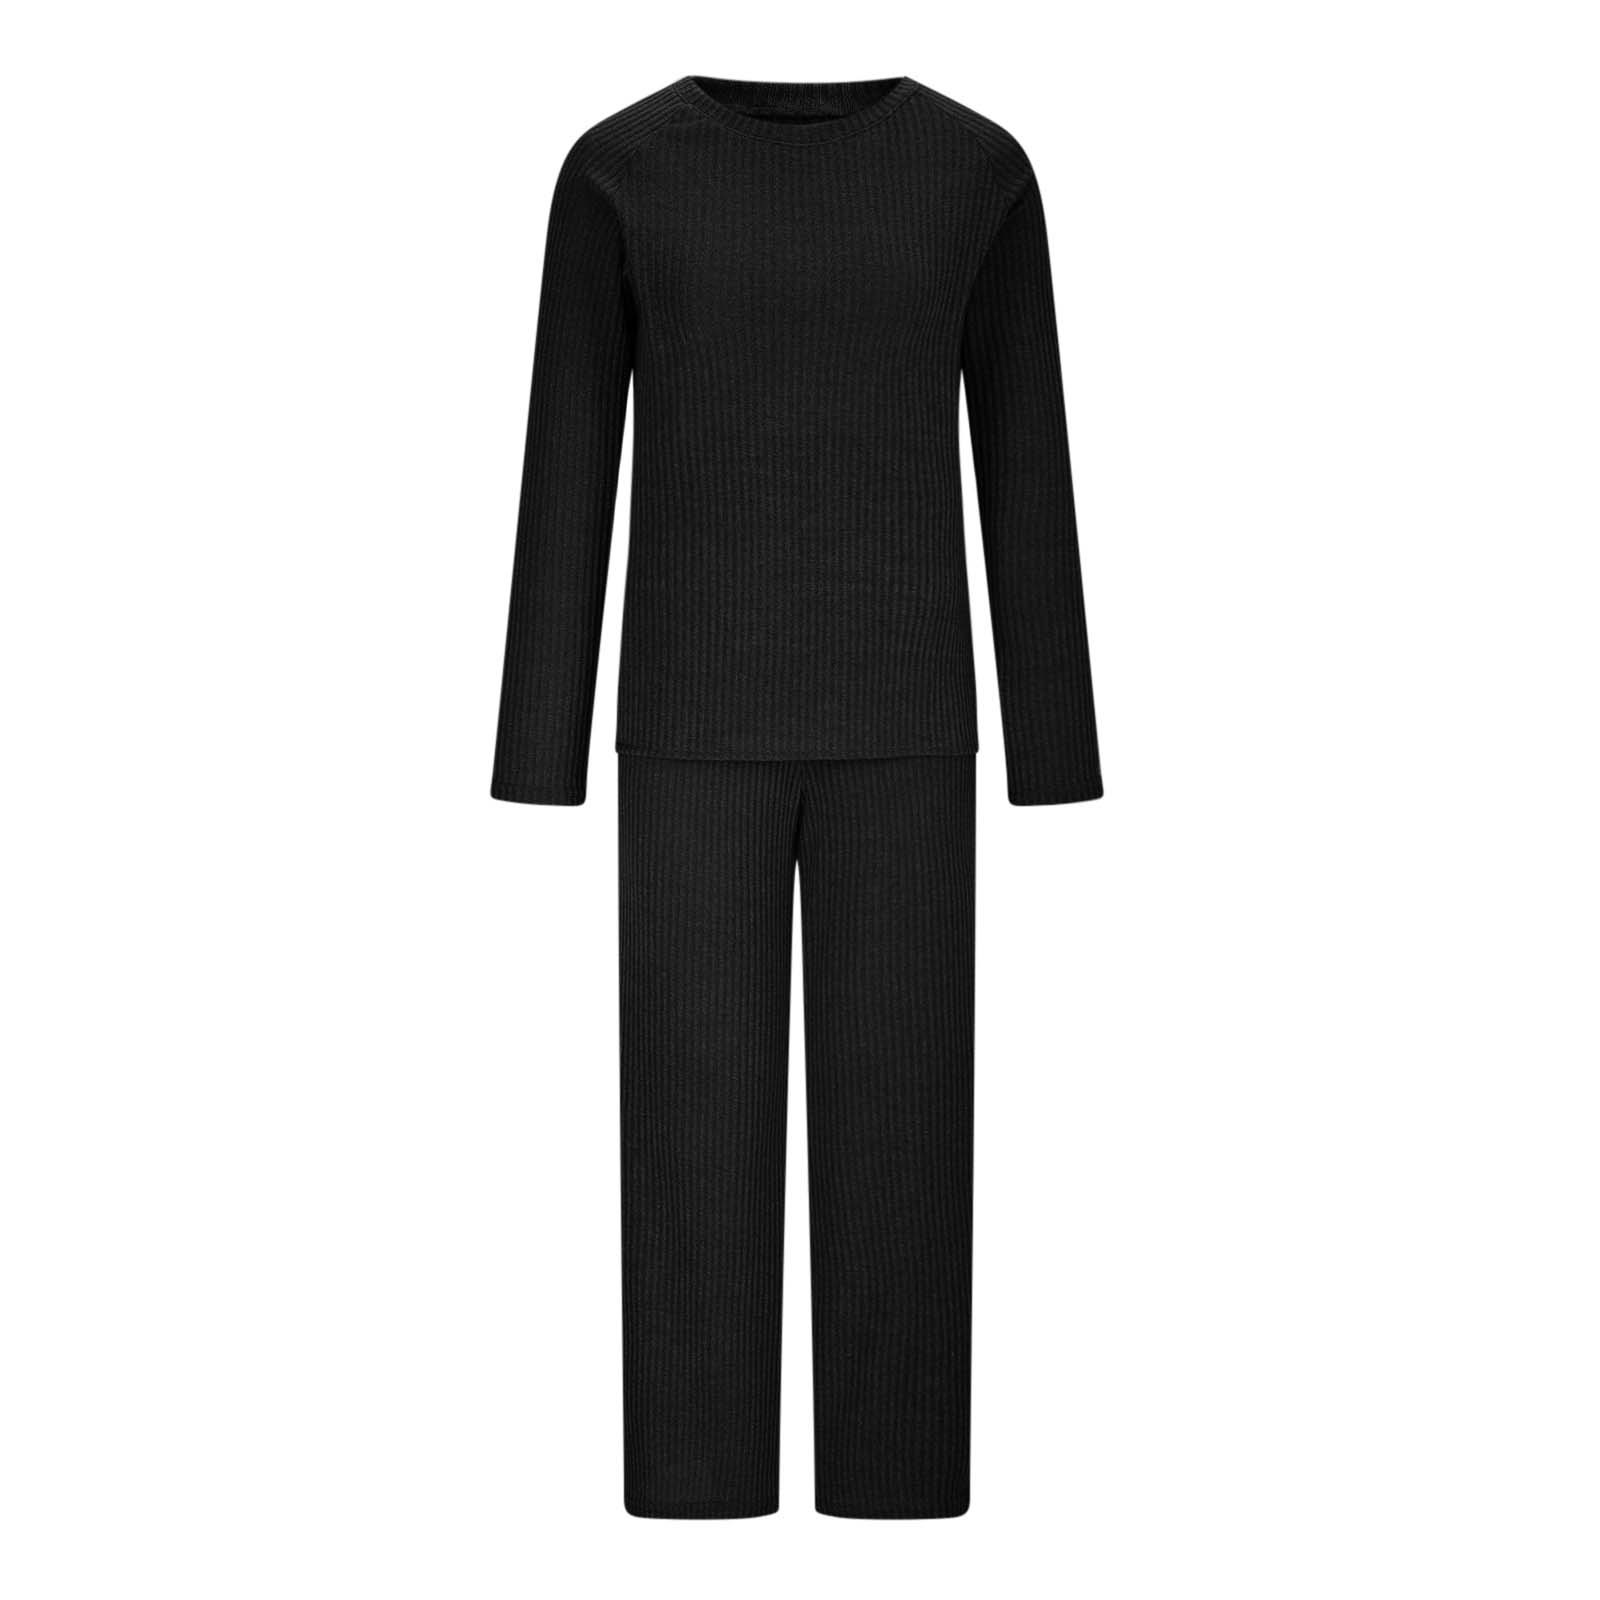 Women's Casual Ribbed Knit 2 Piece Outfit Long Sleeve Sweater Pullover and Wide Leg Long Pants Sweater Set Fall Clothes - image 5 of 8